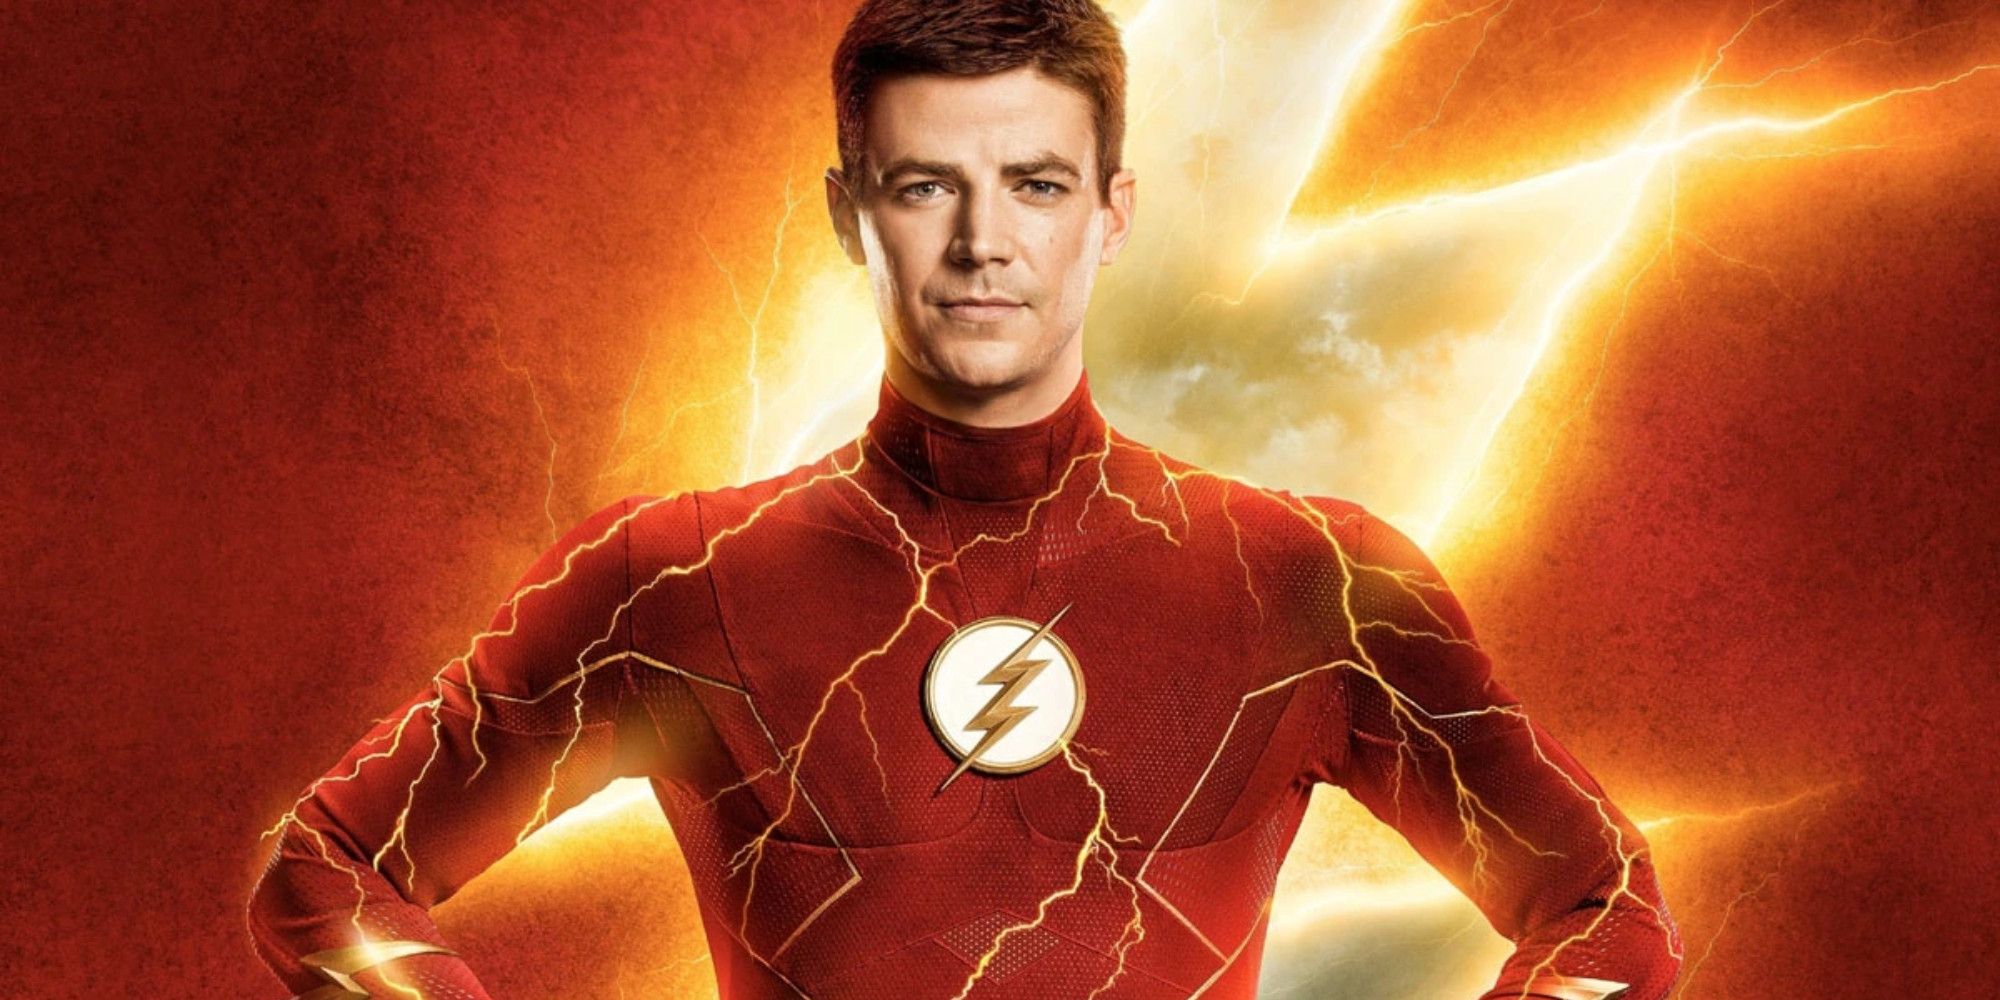 Grant Gustin with arms akimbo in The Flash suit without mask and lightning behind him